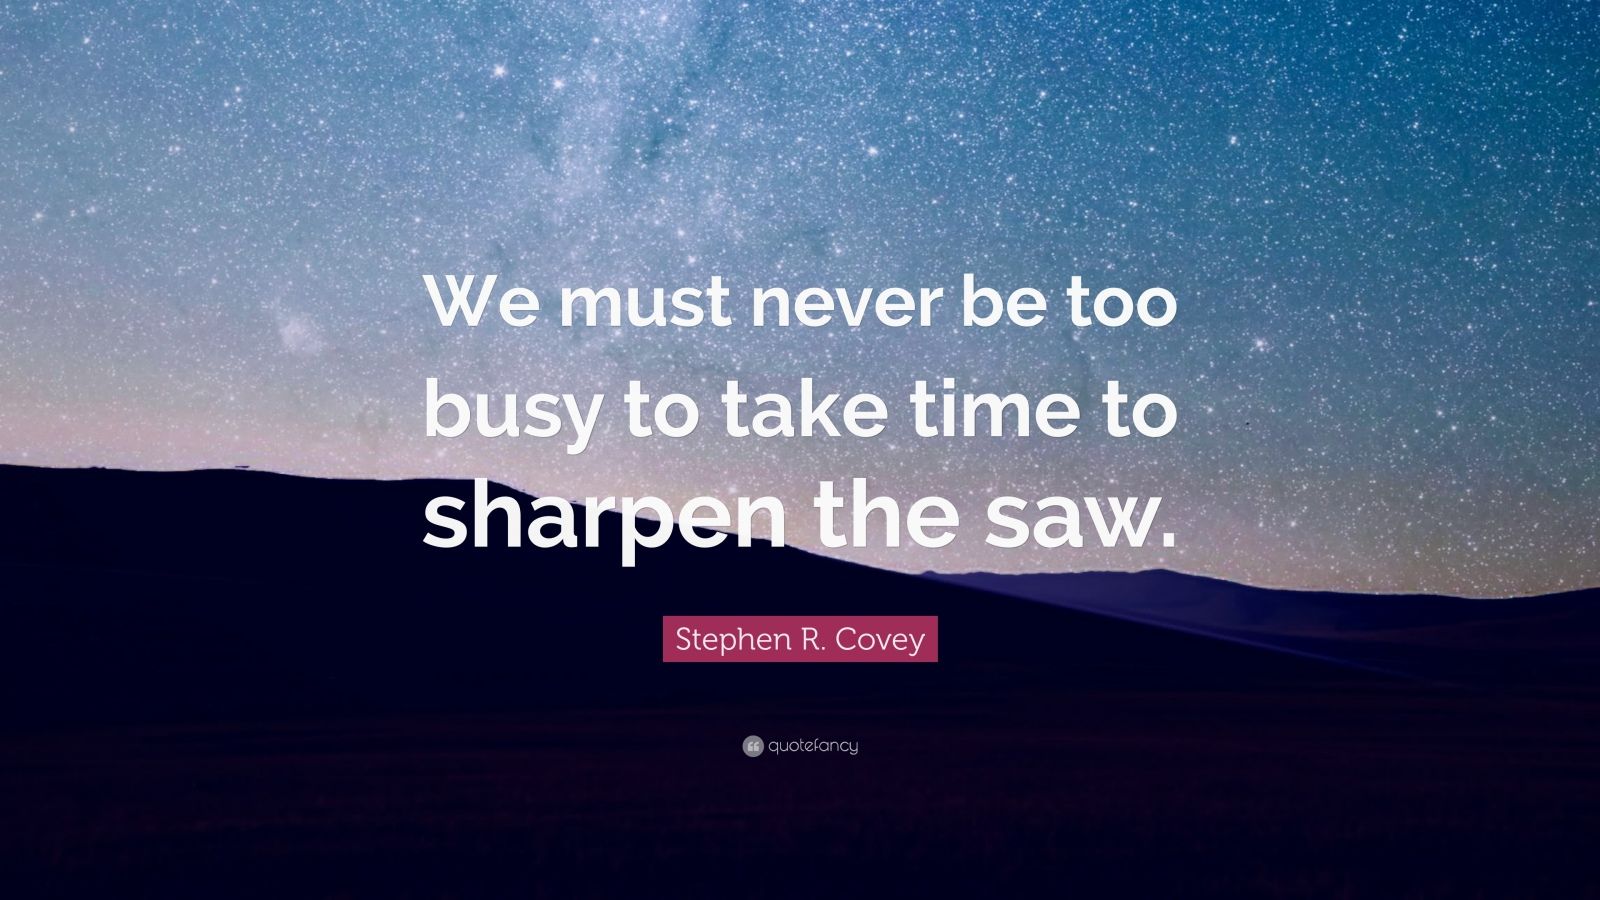 424794 Stephen R Covey Quote We must never be too busy to take time to